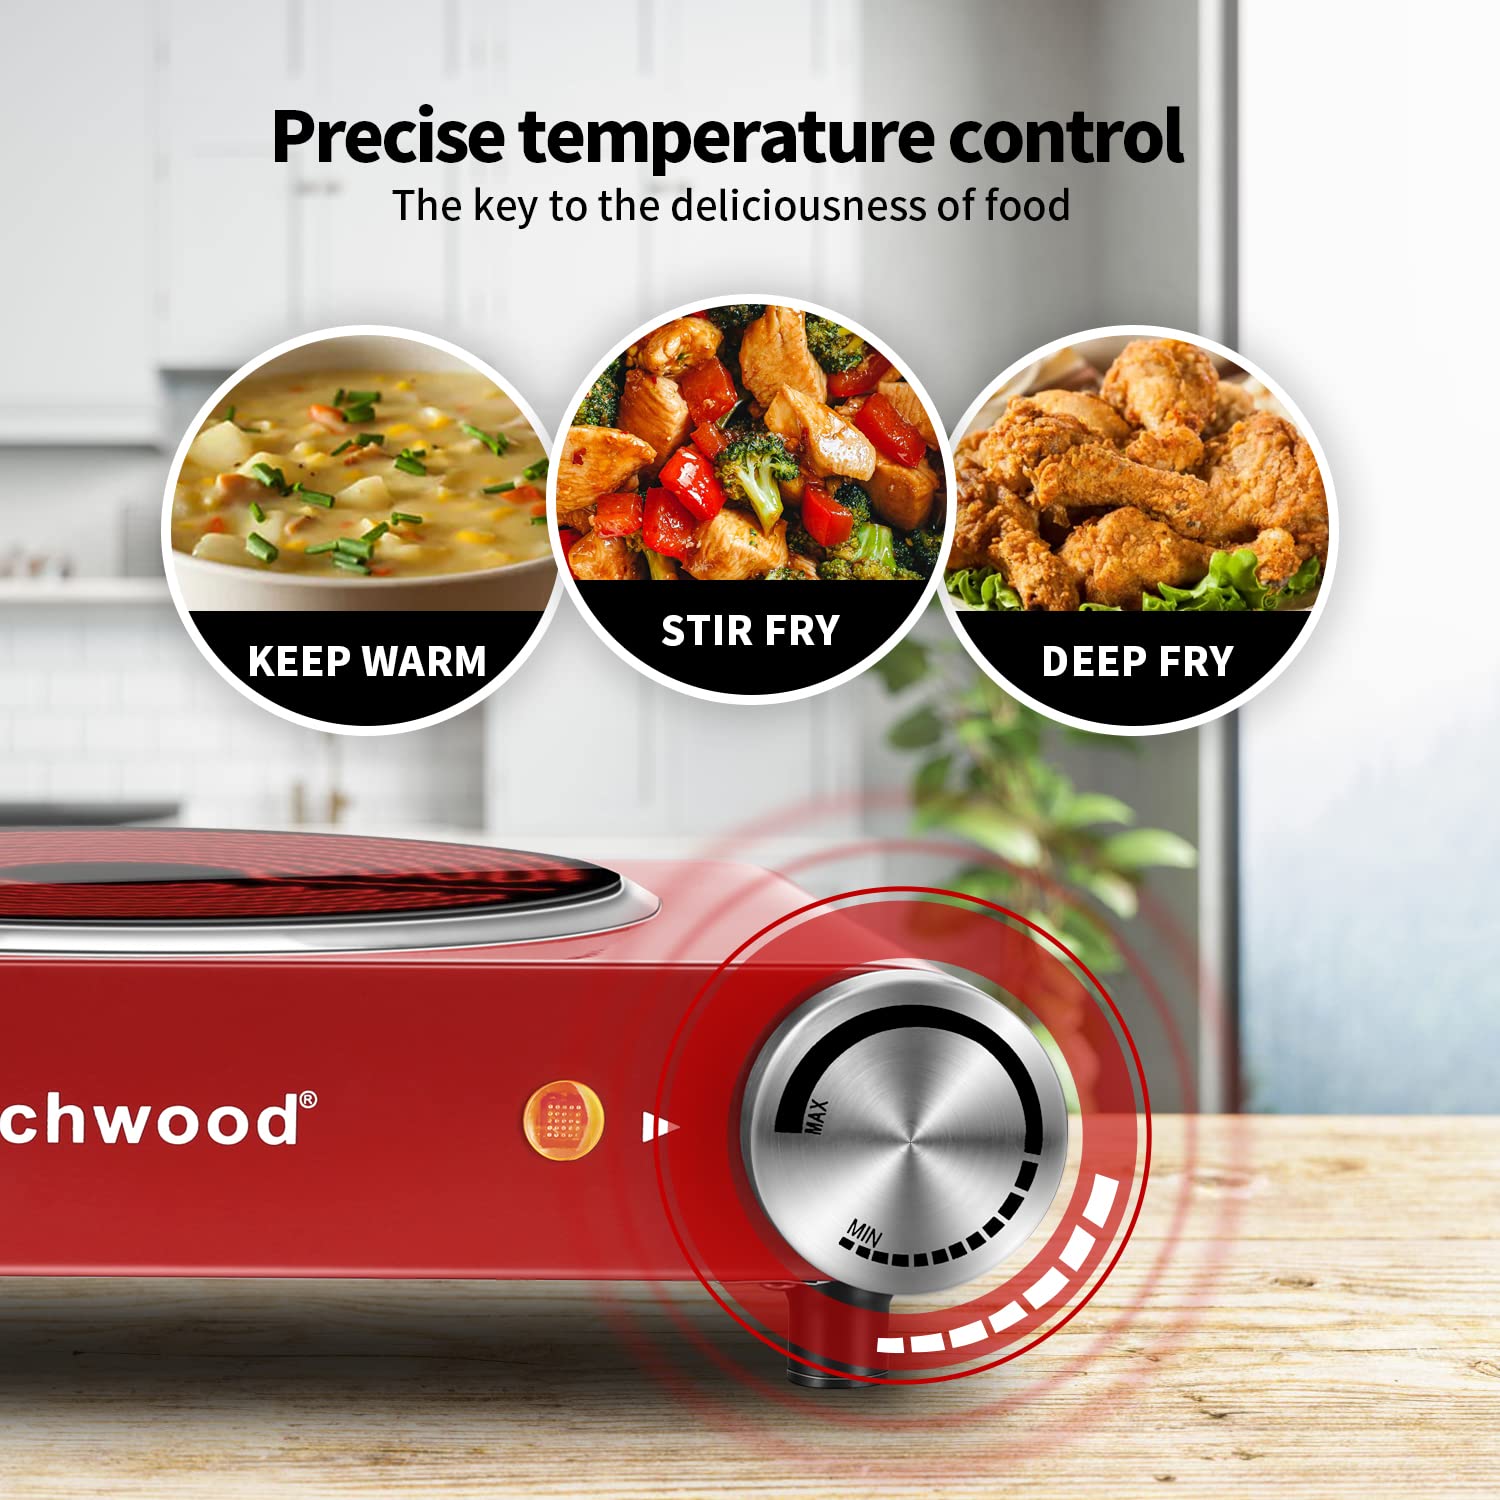 Techwood 1800W Dual Control Infrared Ceramic Electric Hot Plate with A